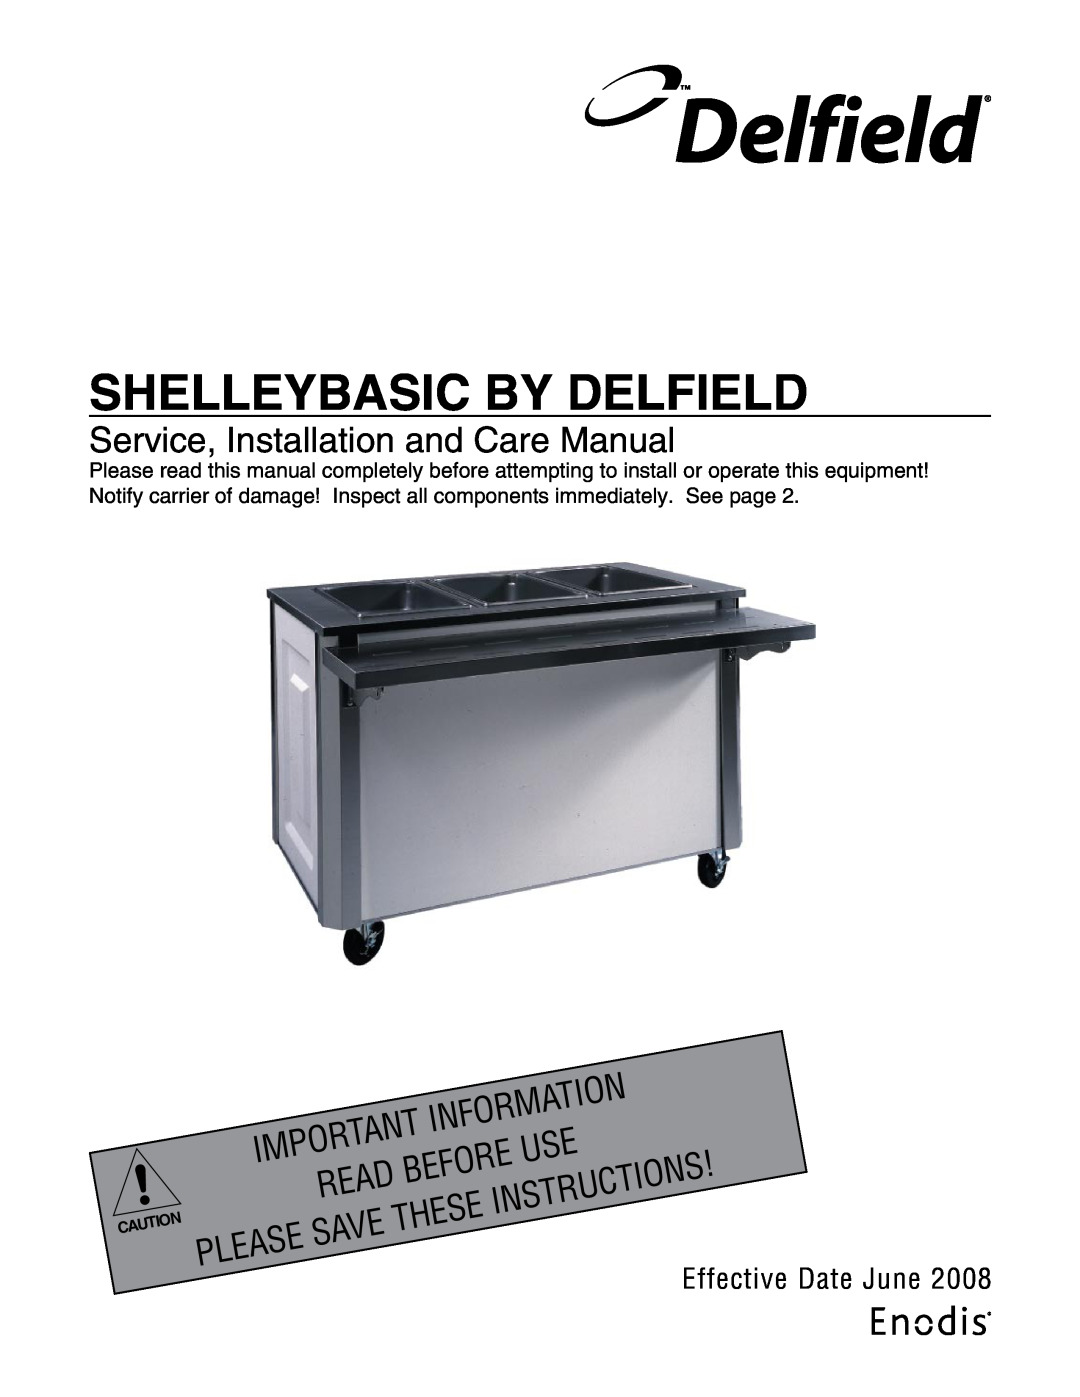 Delfield manual Before, Shelleybasic By Delfield, Service, Installation and Care Manual, Information, Instructions 